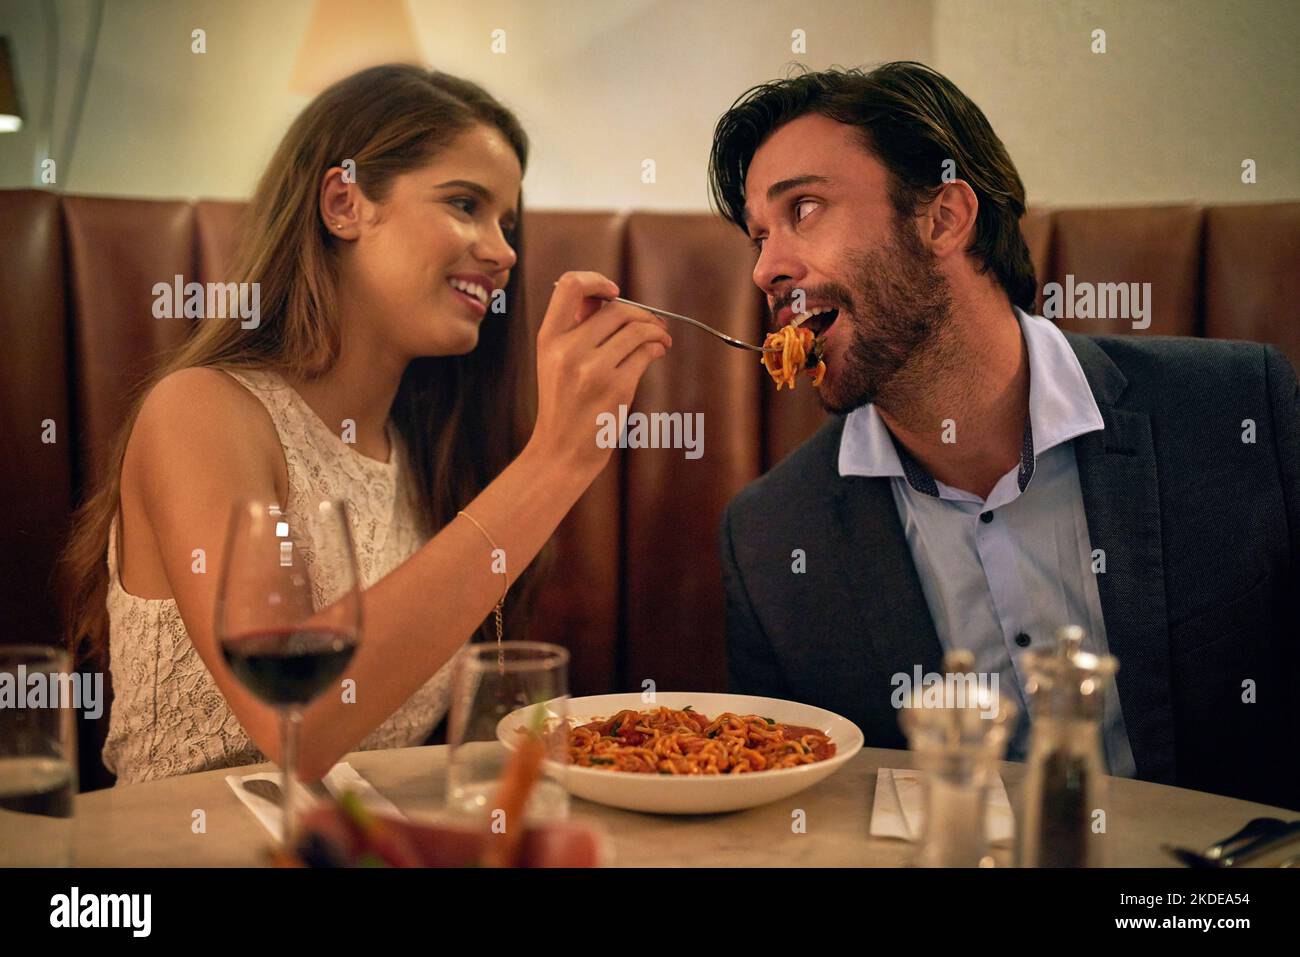 Love at first bite. a young woman feeding her boyfriend a forkful of spaghetti during a romantic dinner date at a restaurant. Stock Photo